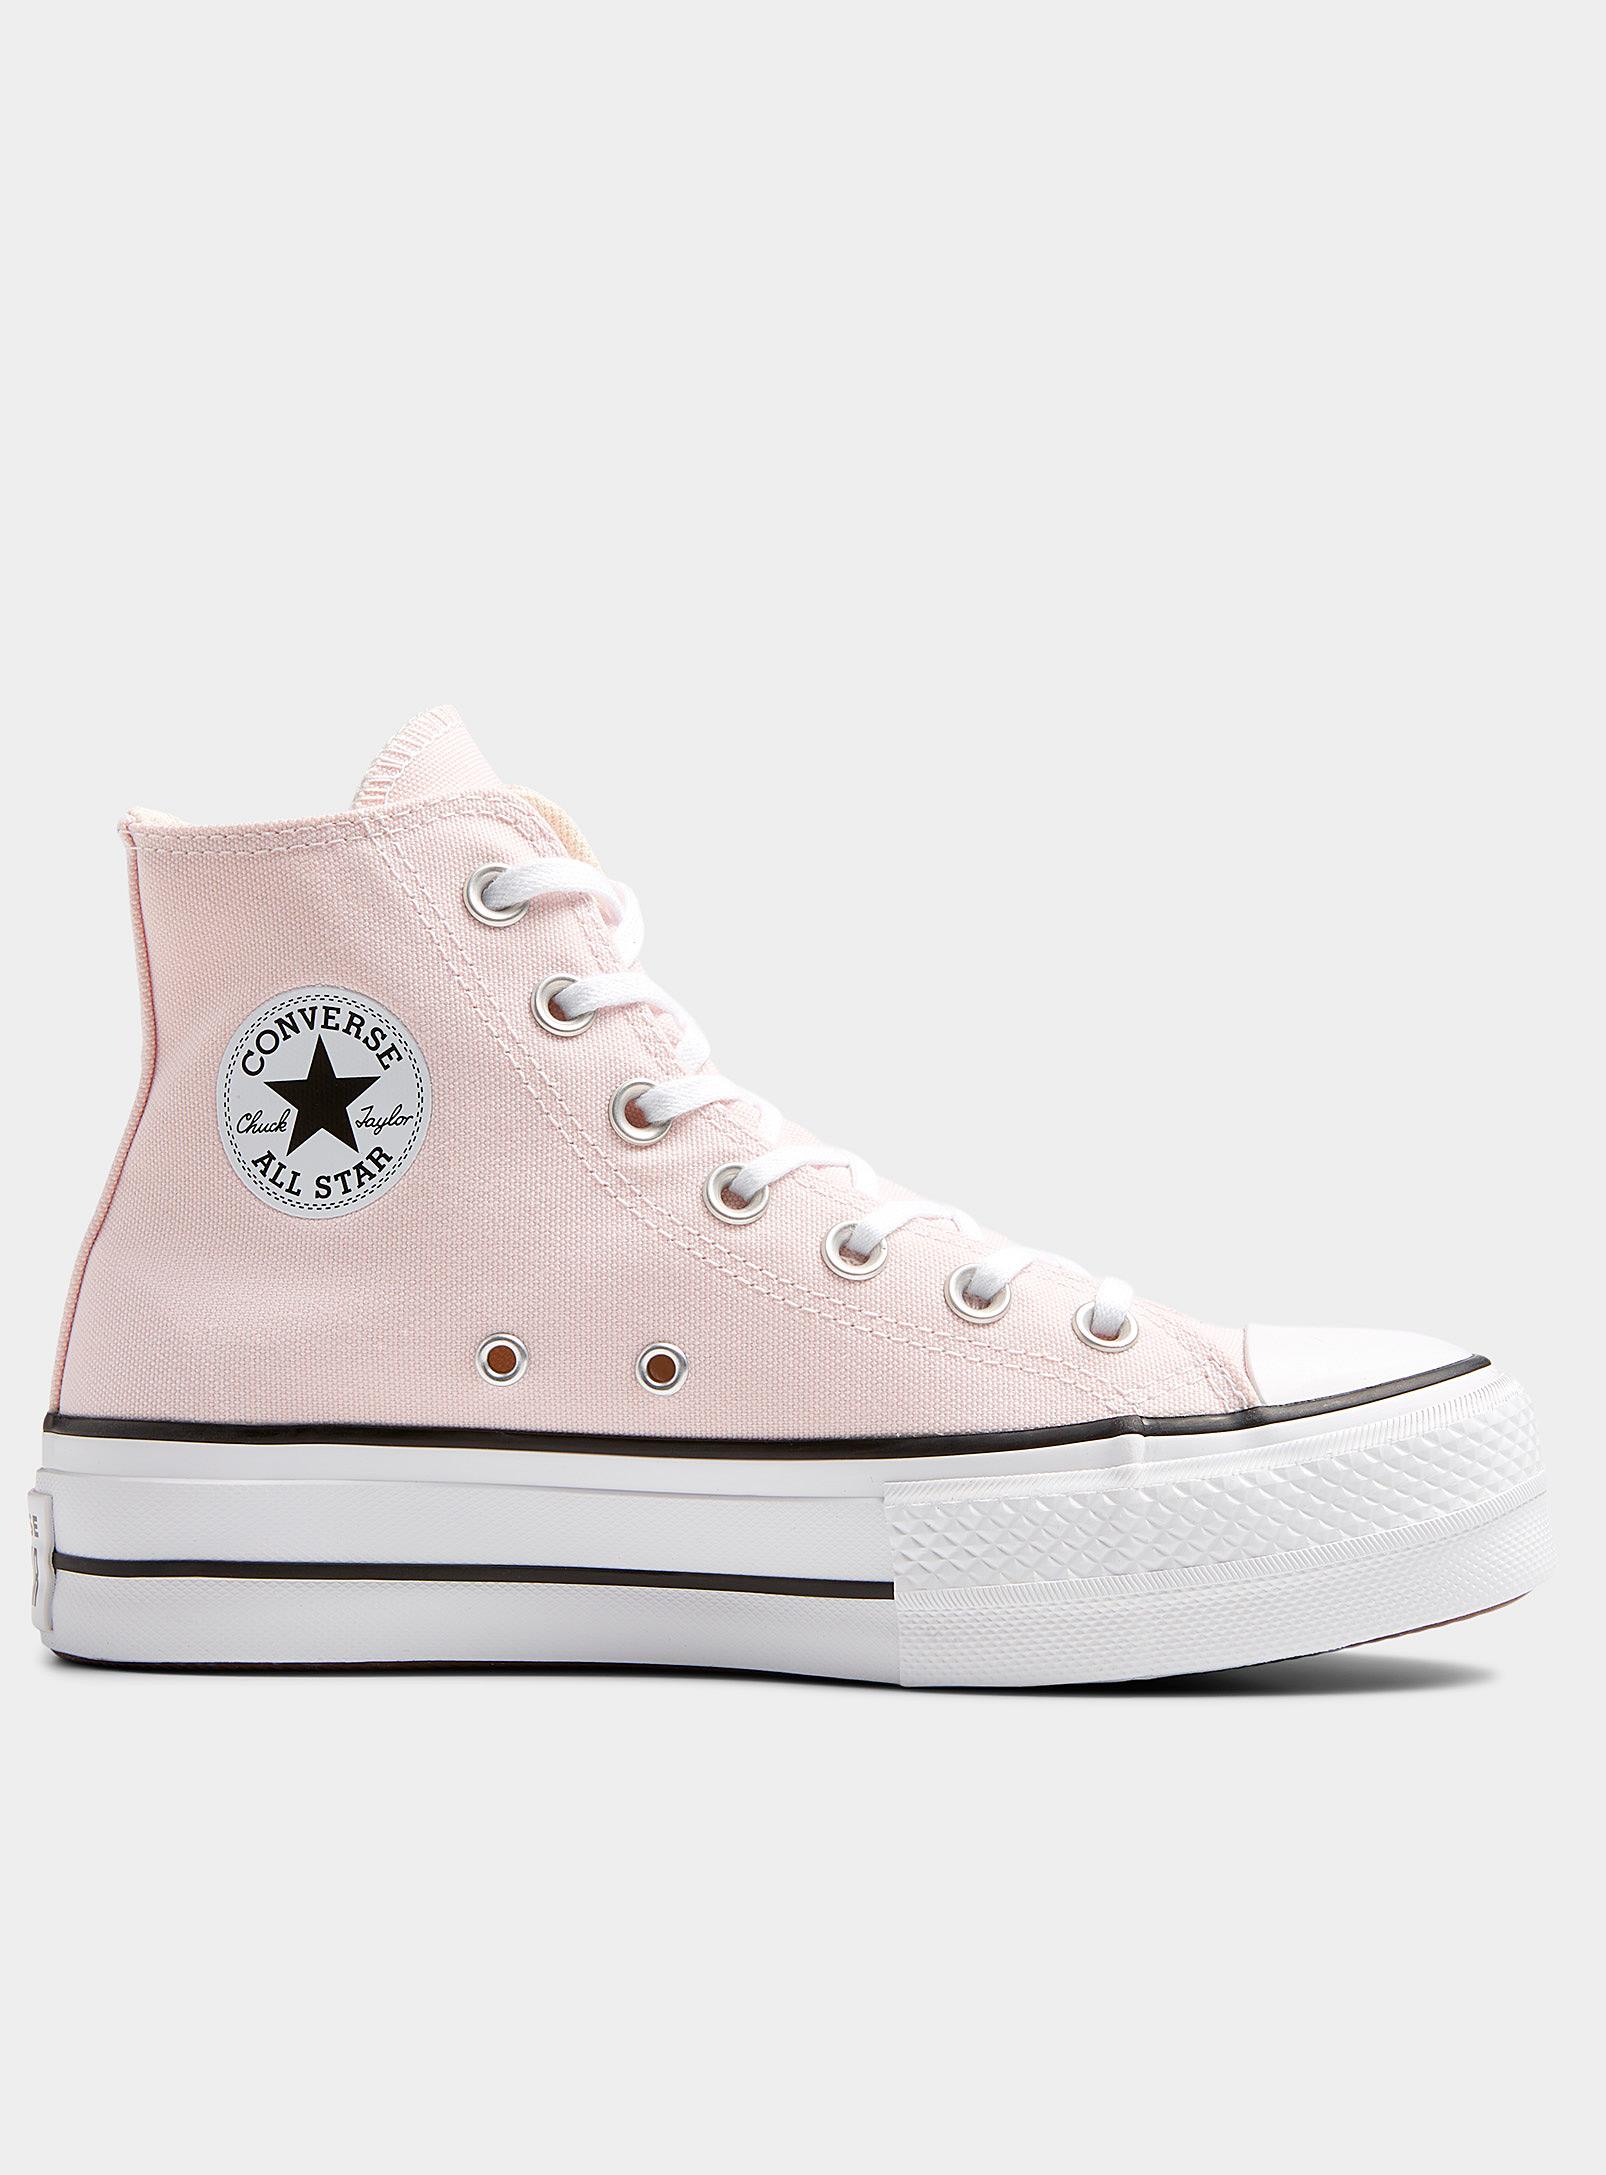 Converse Chuck Taylor All Star Lift High Powder Pink Platform Sneakers Women in Natural | Lyst